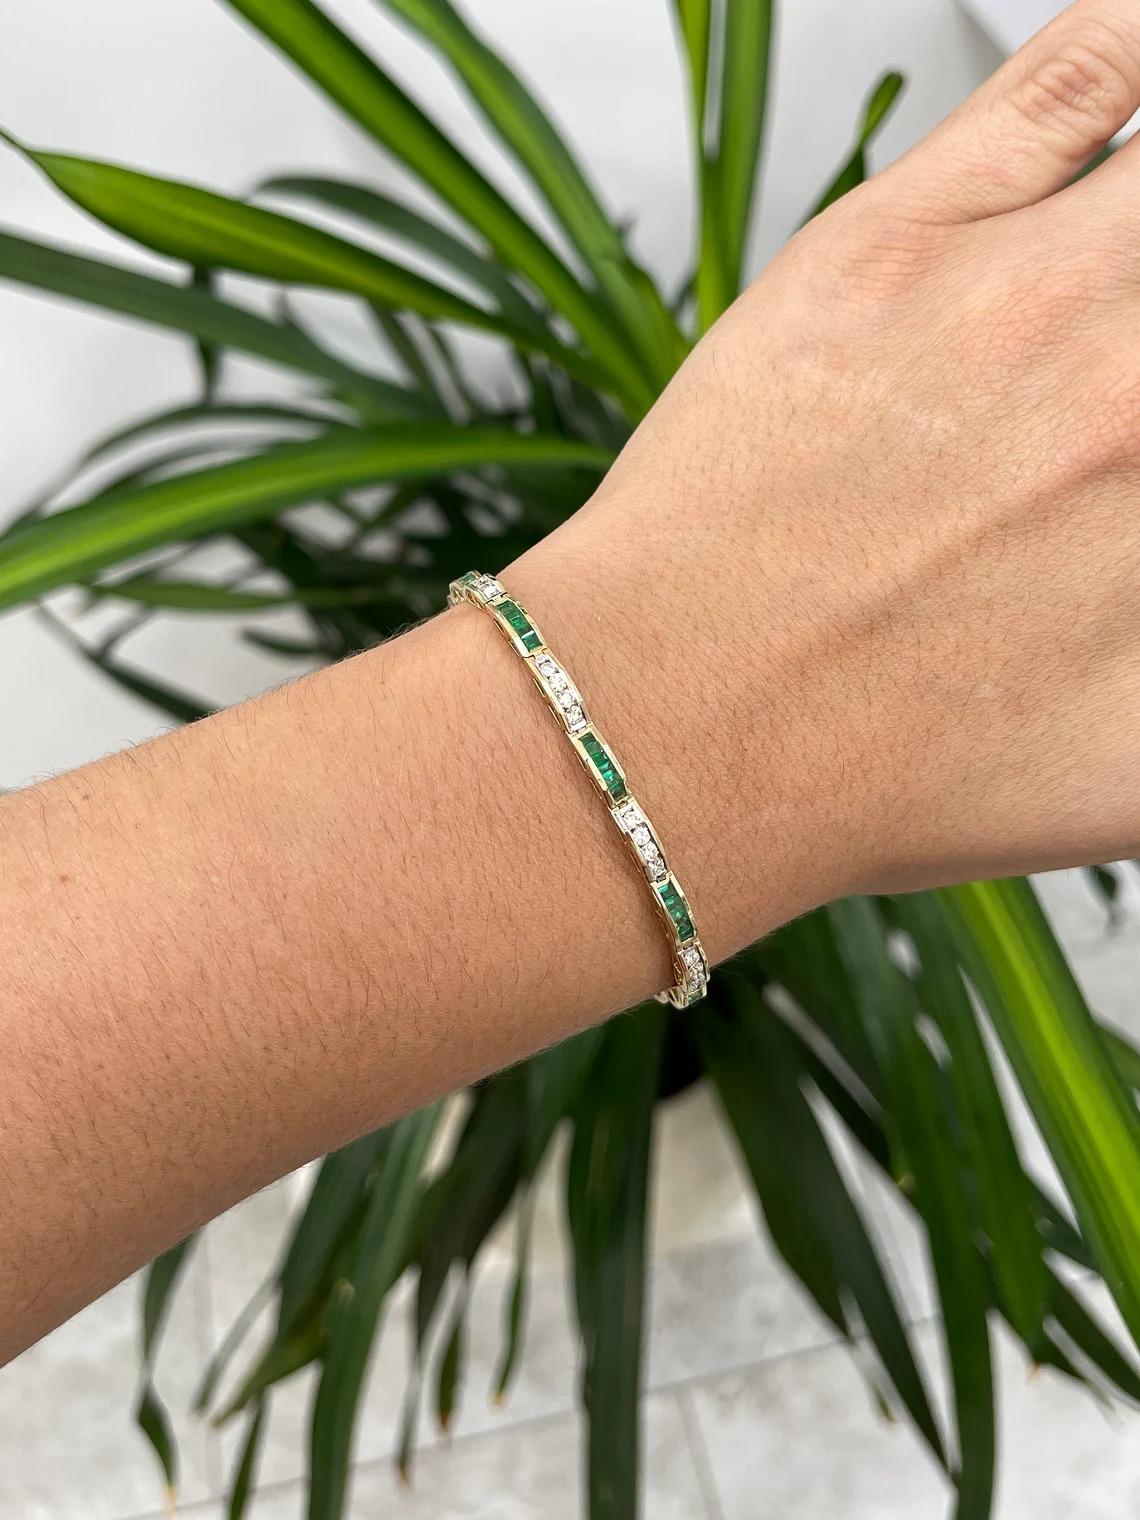 Featured is a beautiful emerald and diamond unisex bracelet. This bracelet carries almost two full carats of emeralds-emerald cut with very good clarity and luster. Channel set with numerous brilliant round cur diamonds going along the entire